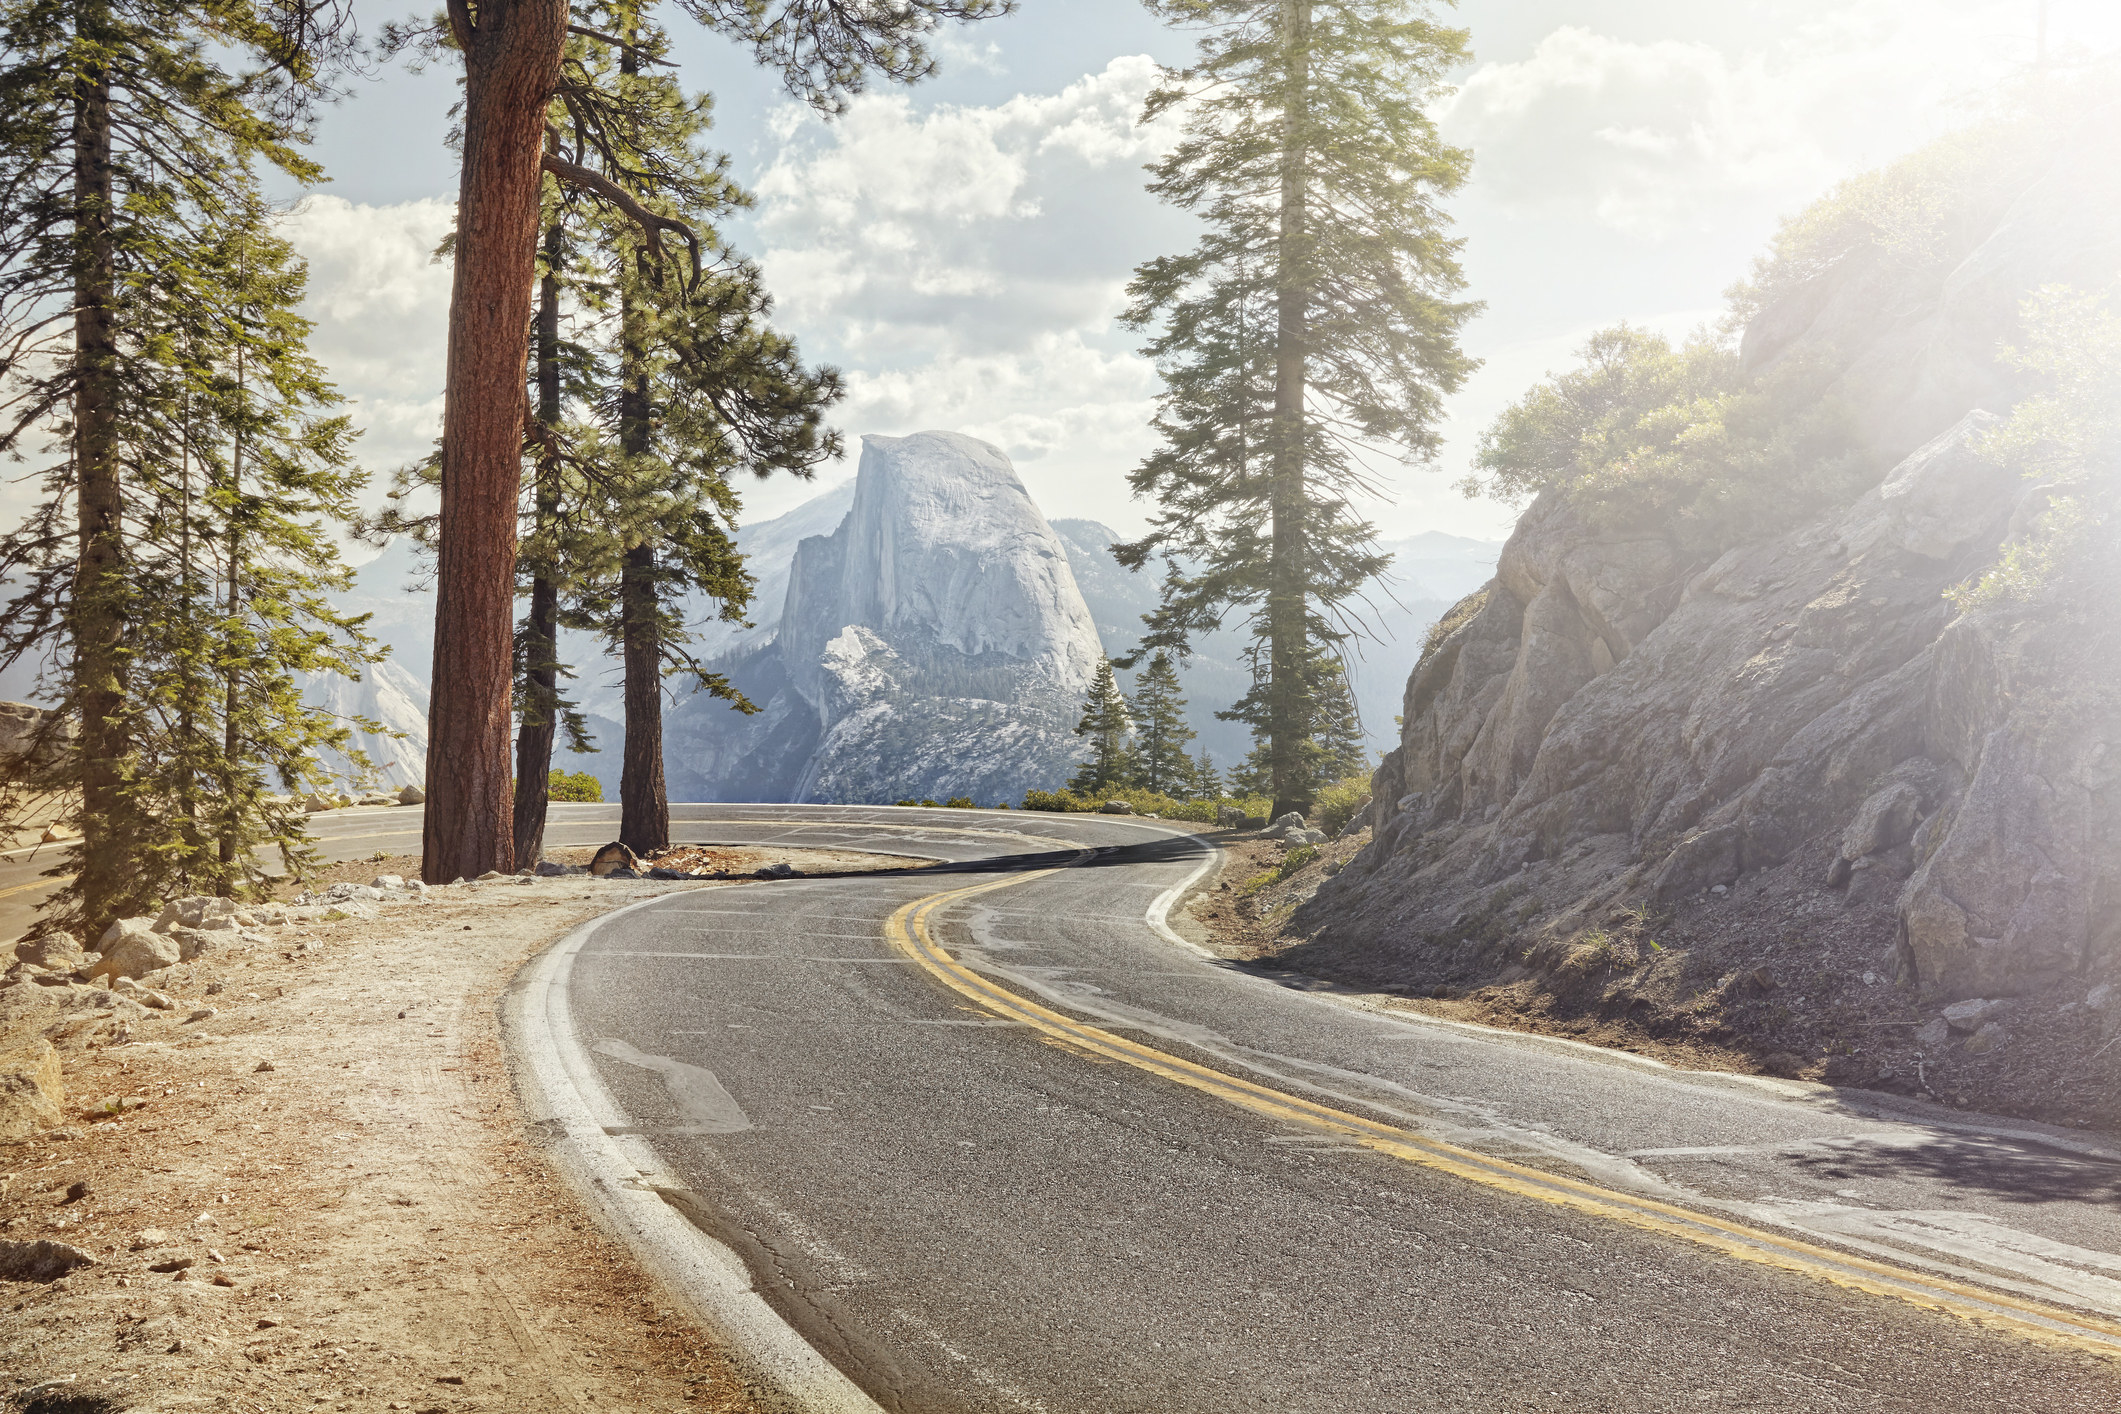 Winding road with Half Dome in Yosemite